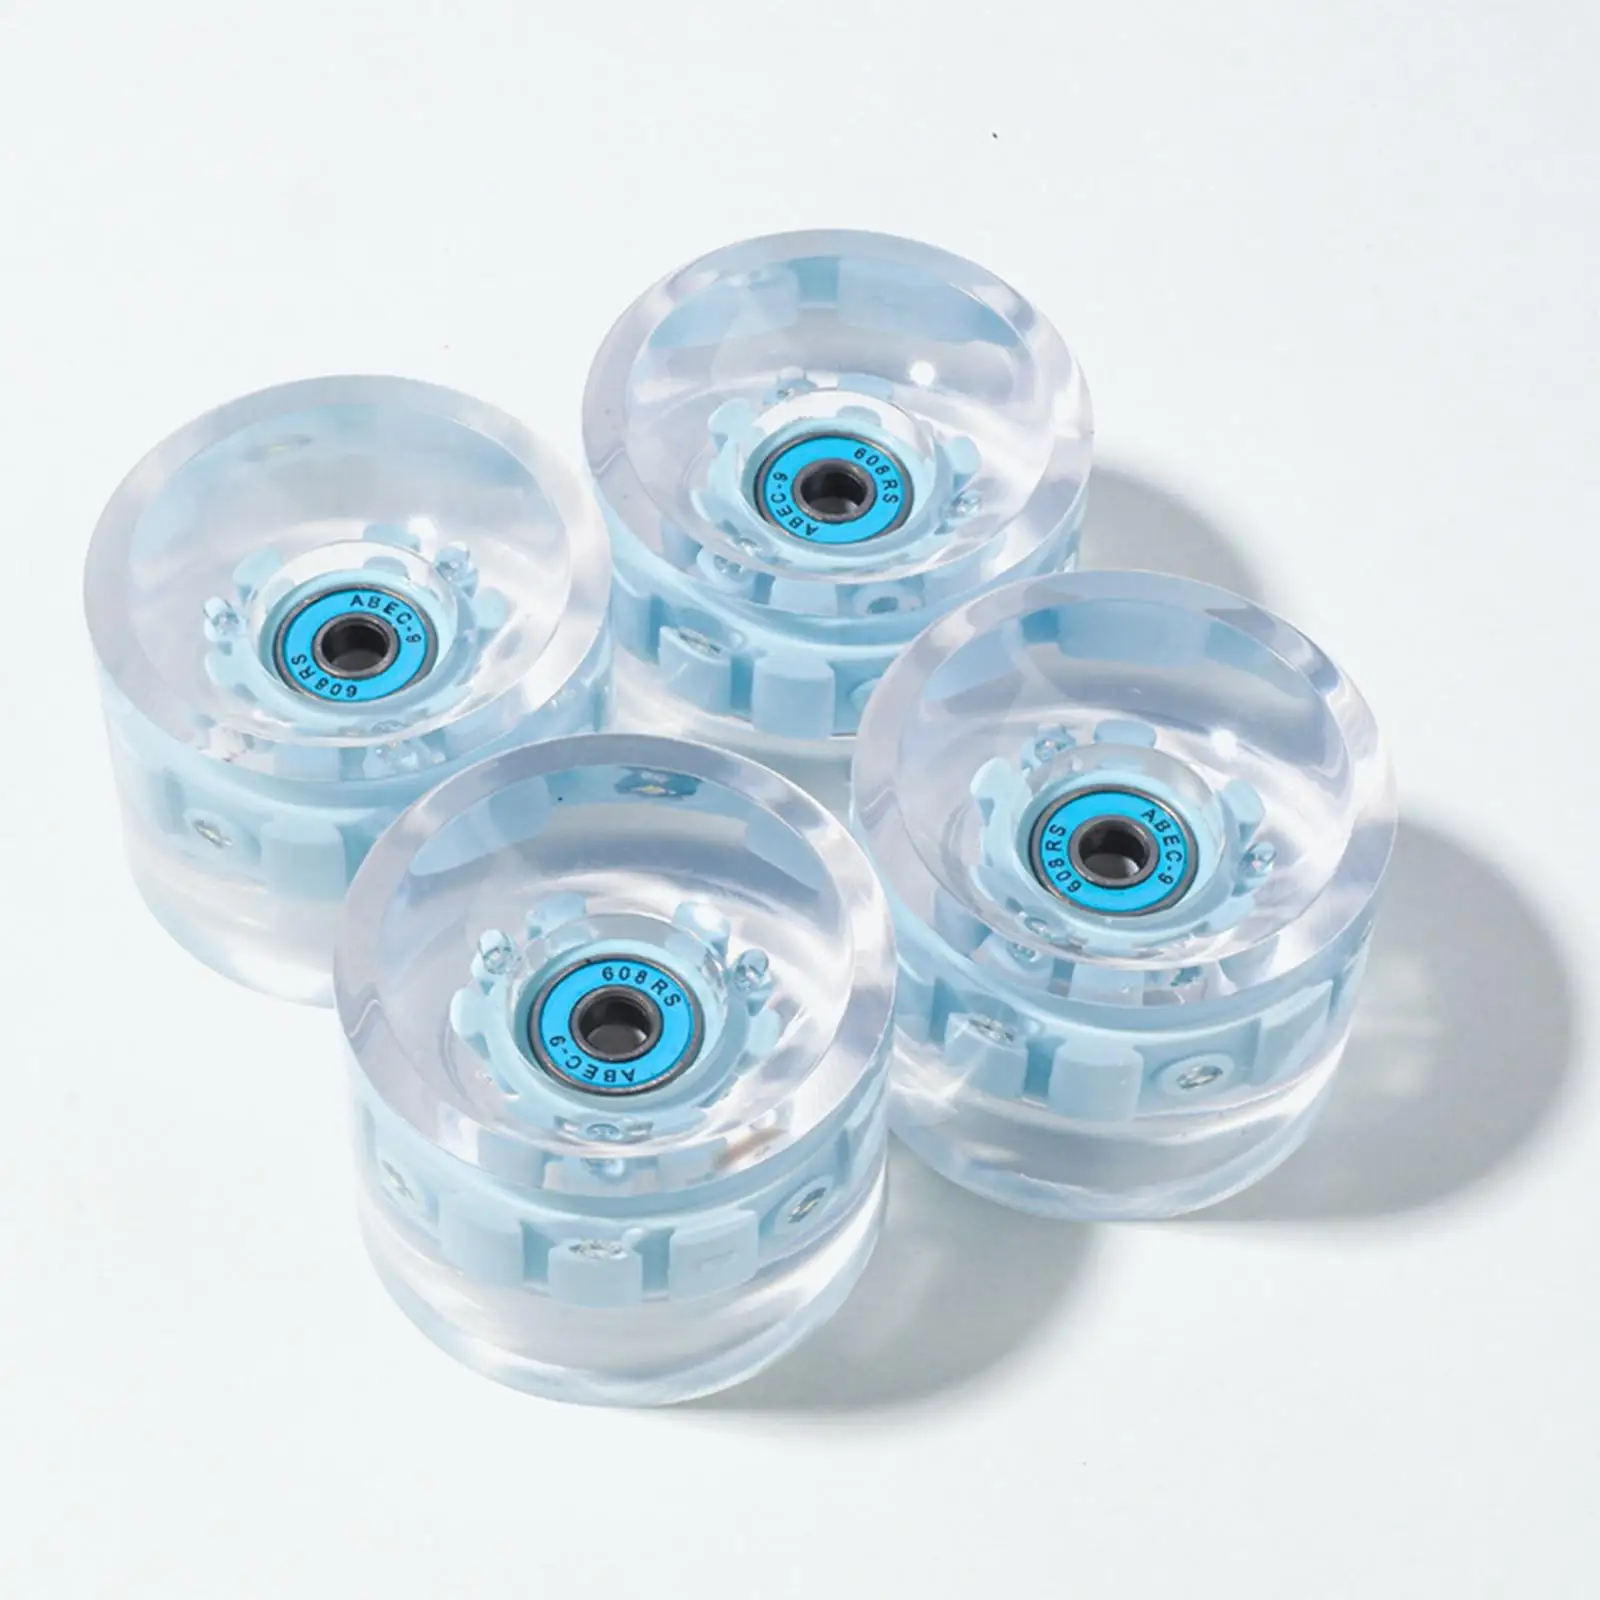 Skateboard Wheels, Replacement with Bearings, 78A, with LED Light Roller Skate